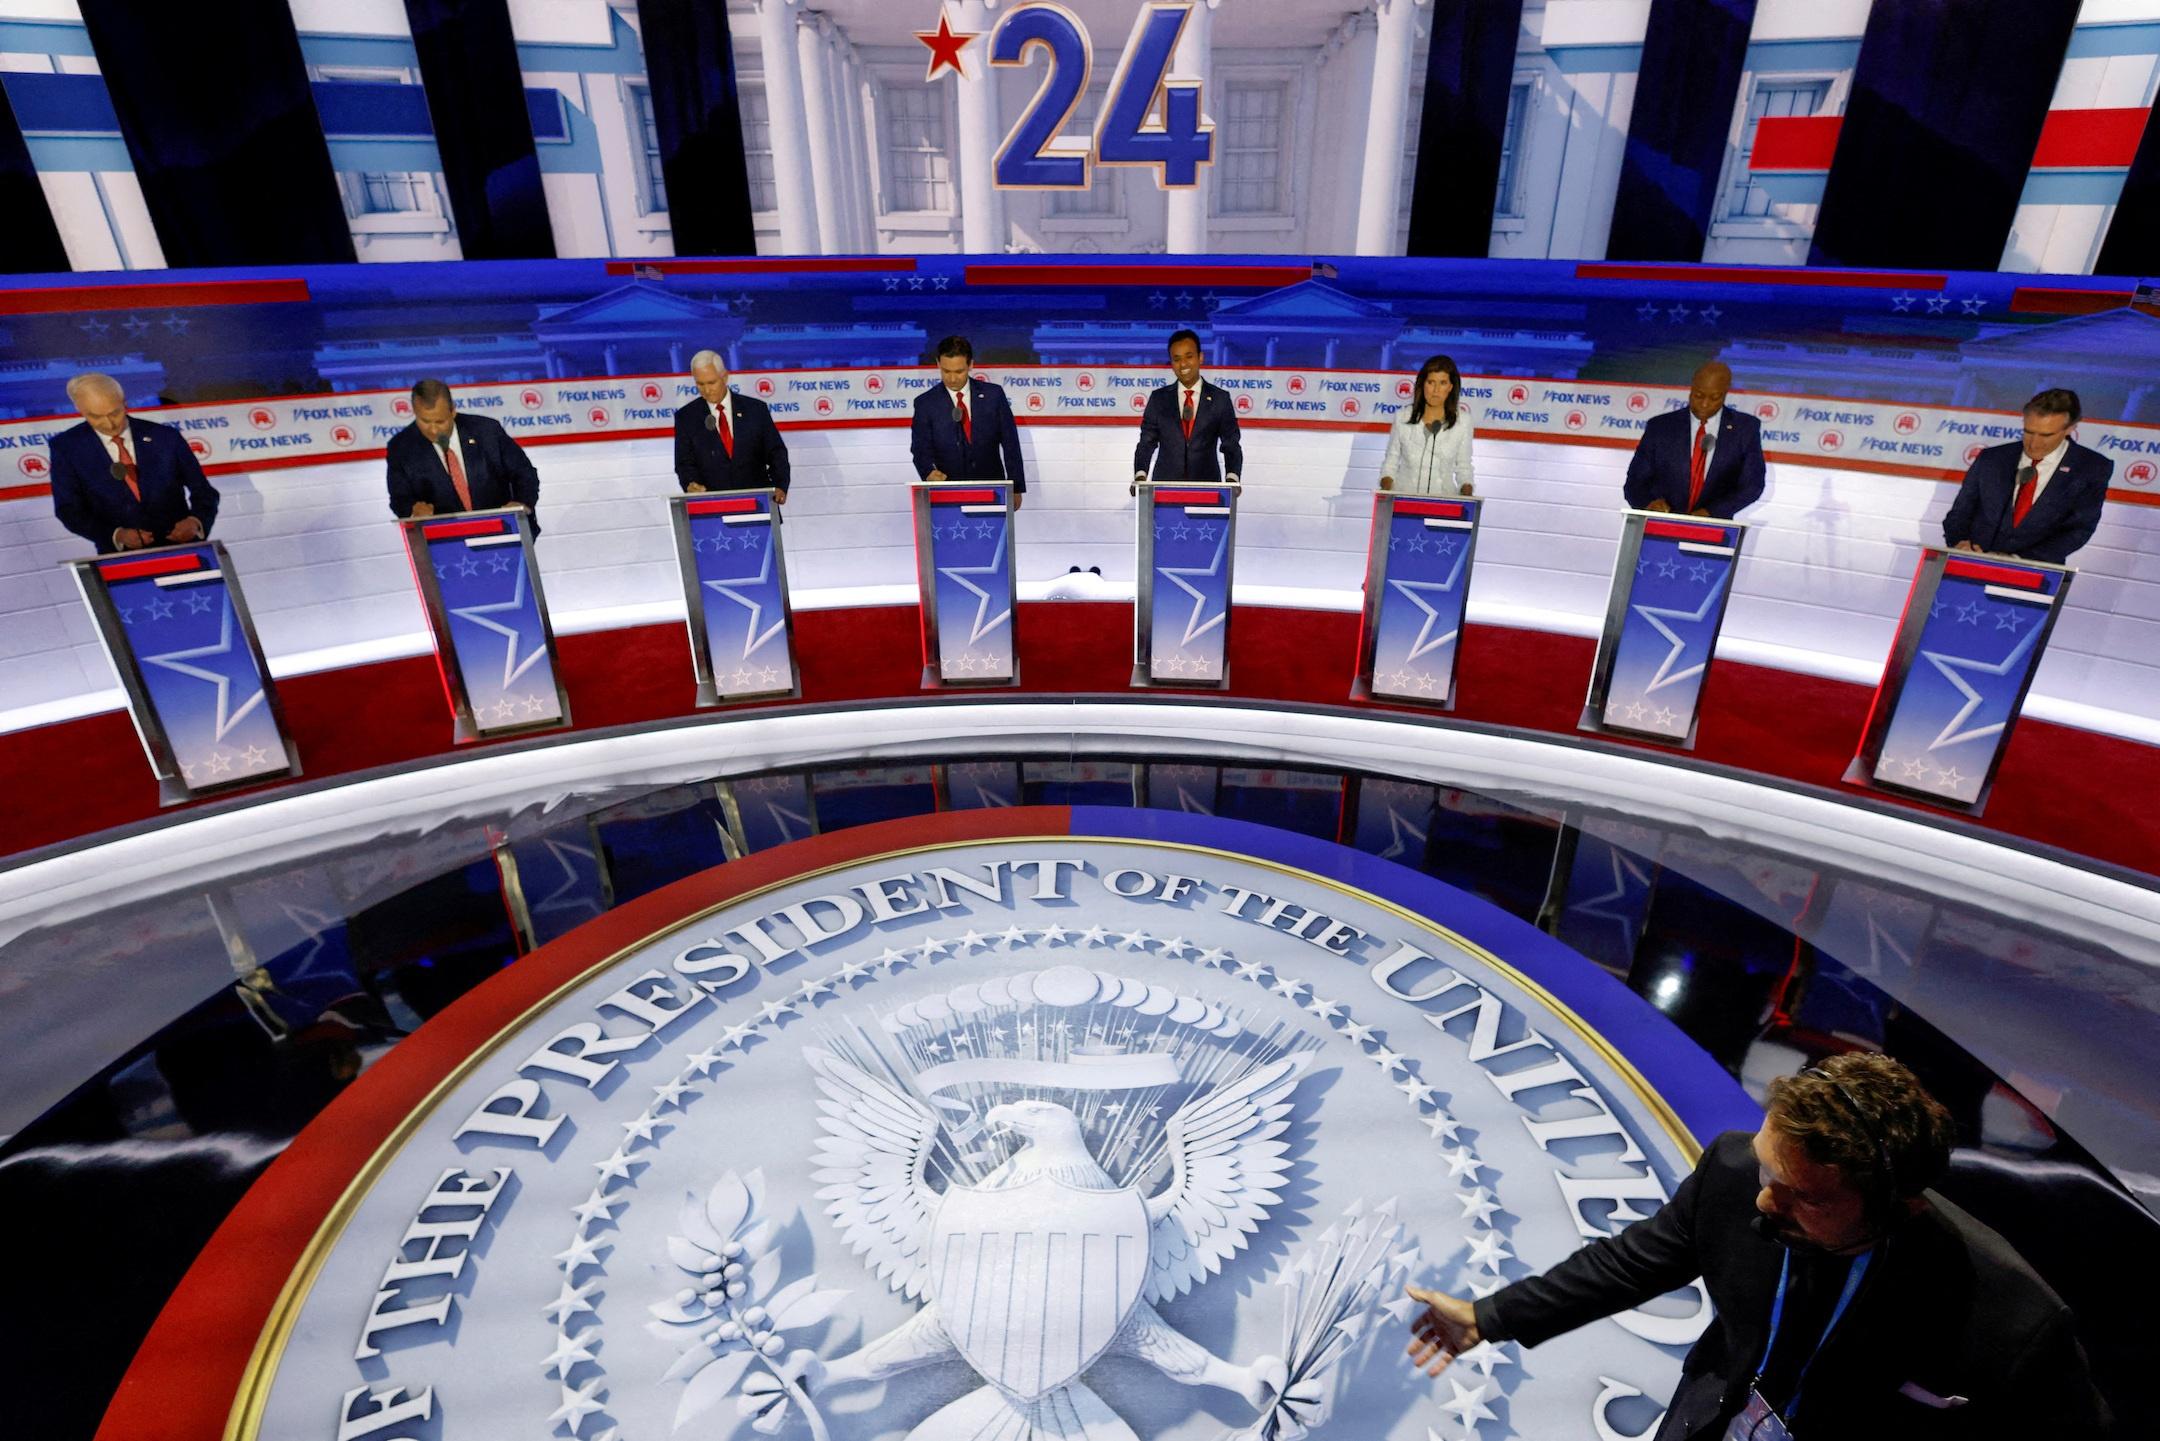 GOP hopefuls try to take spotlight from Trump at 2nd debate